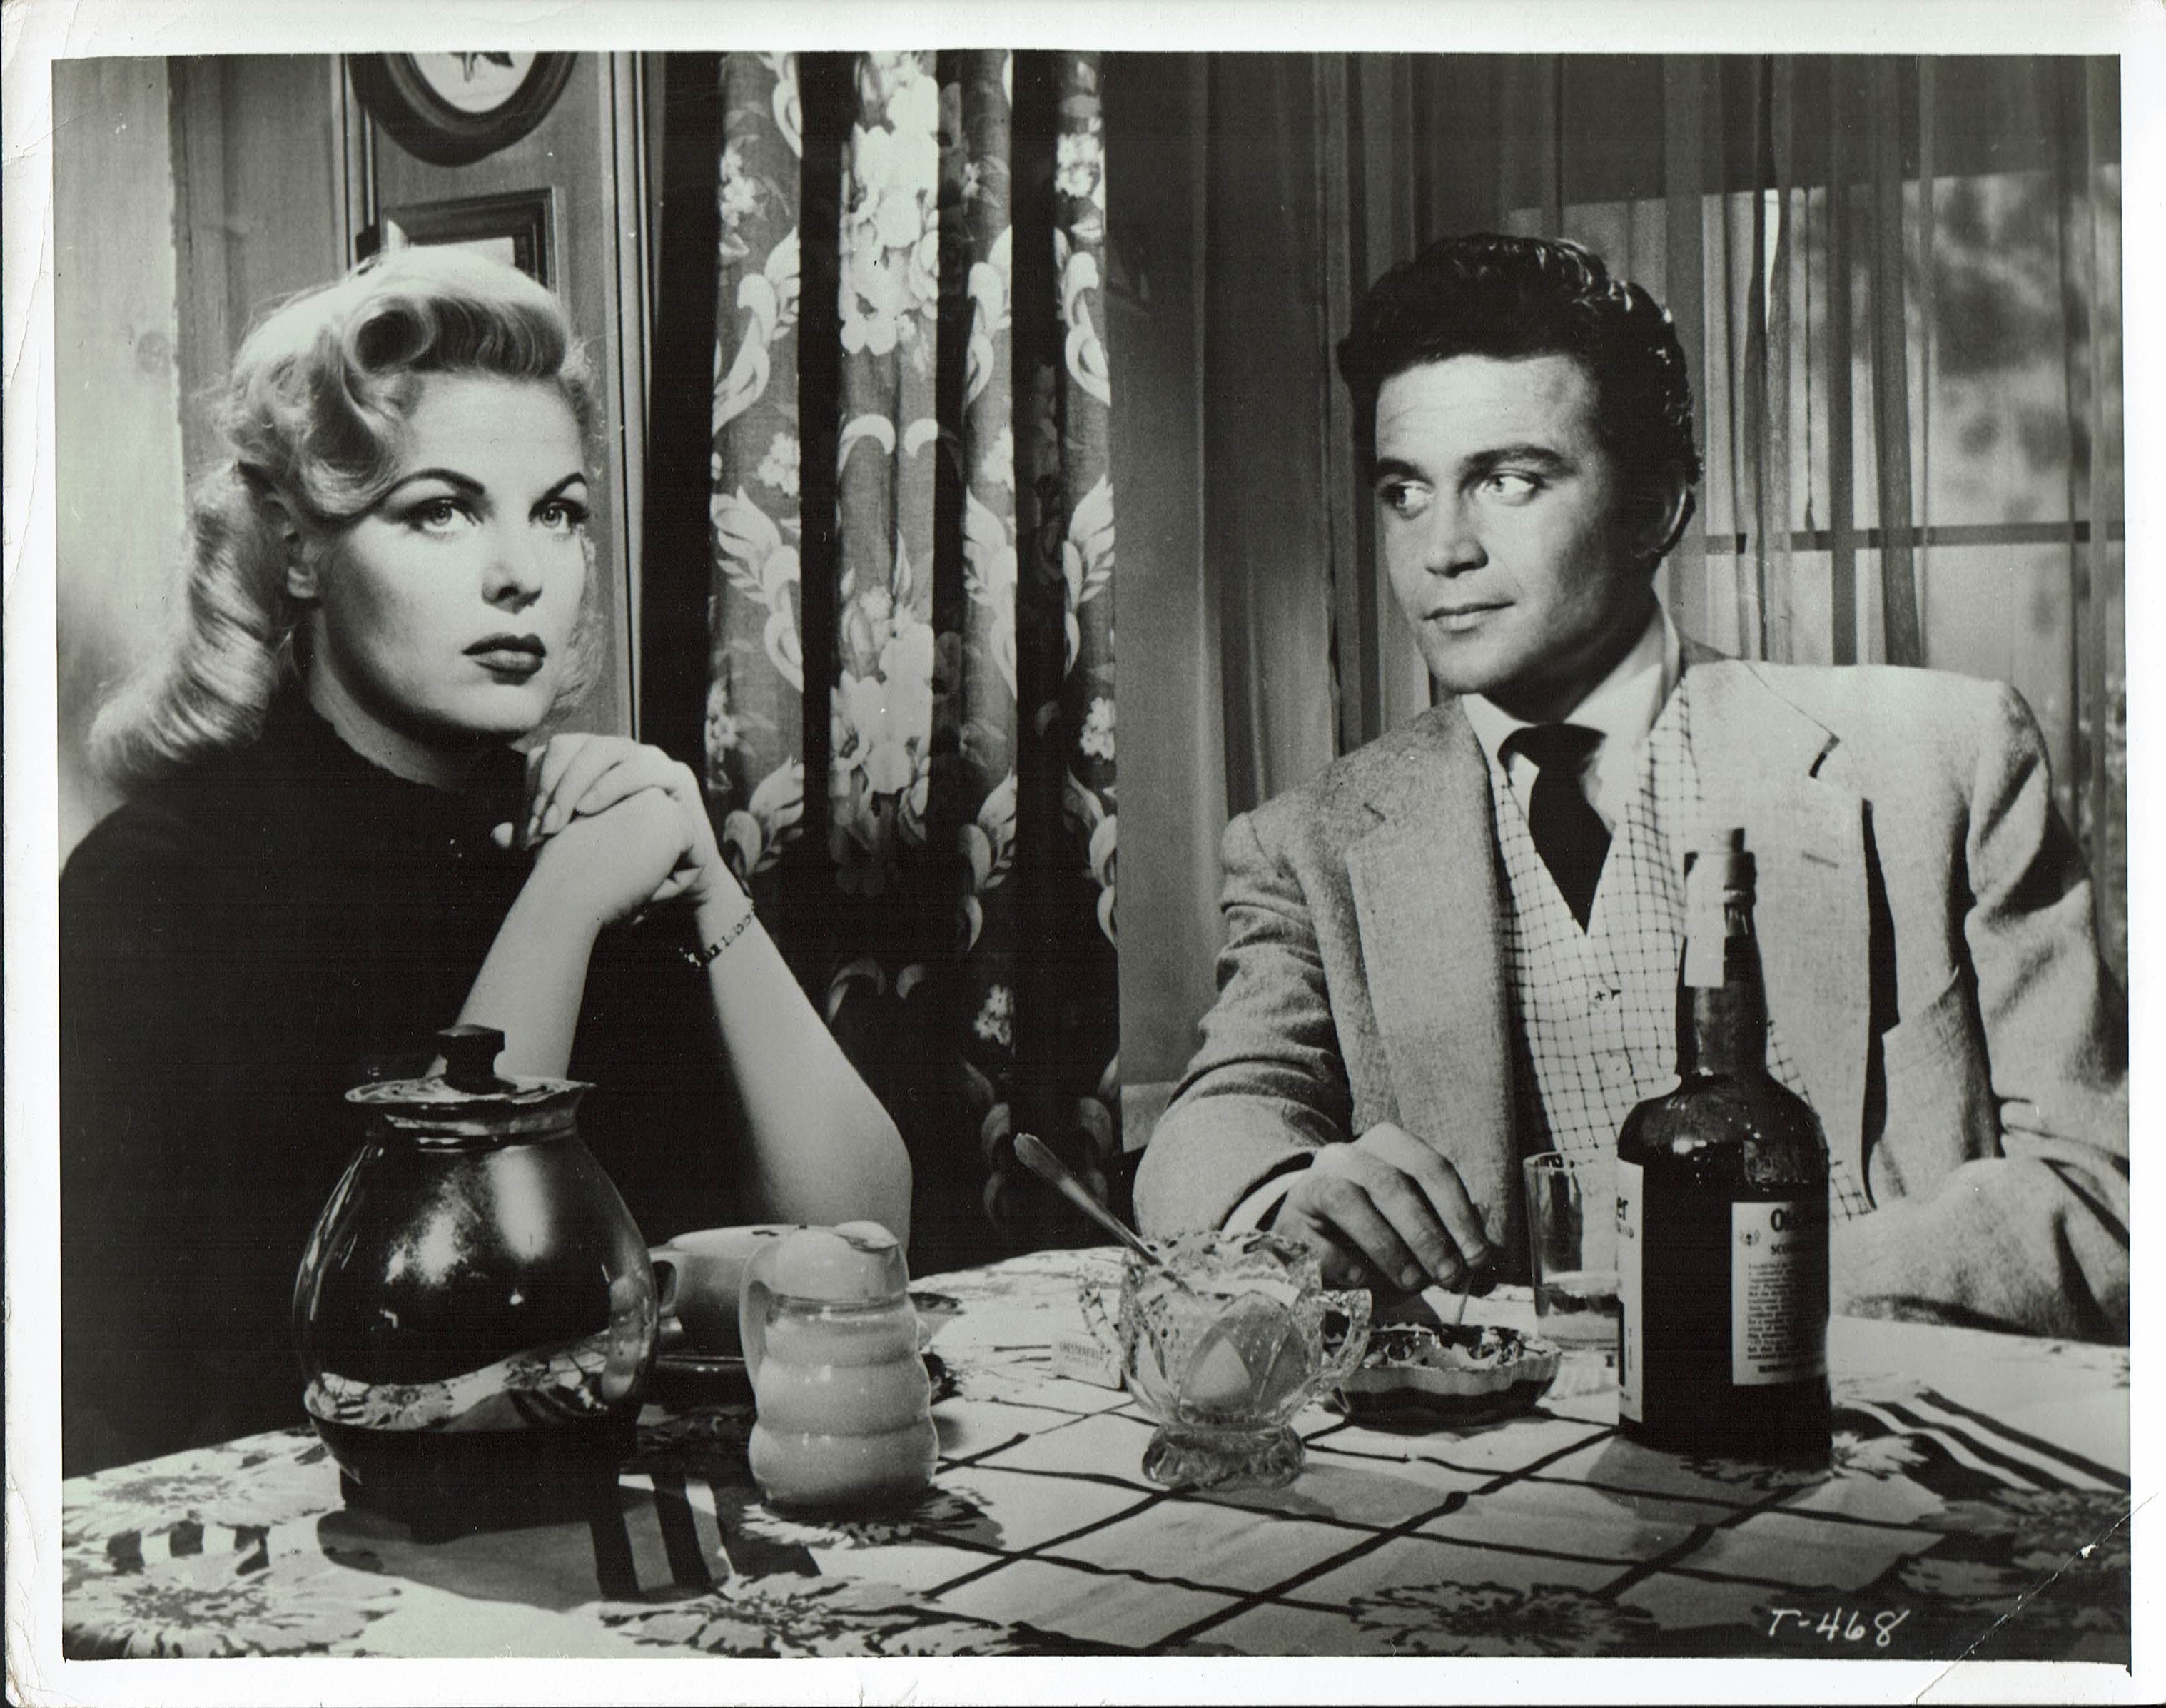 The Other Woman (1954) Screenshot 1 